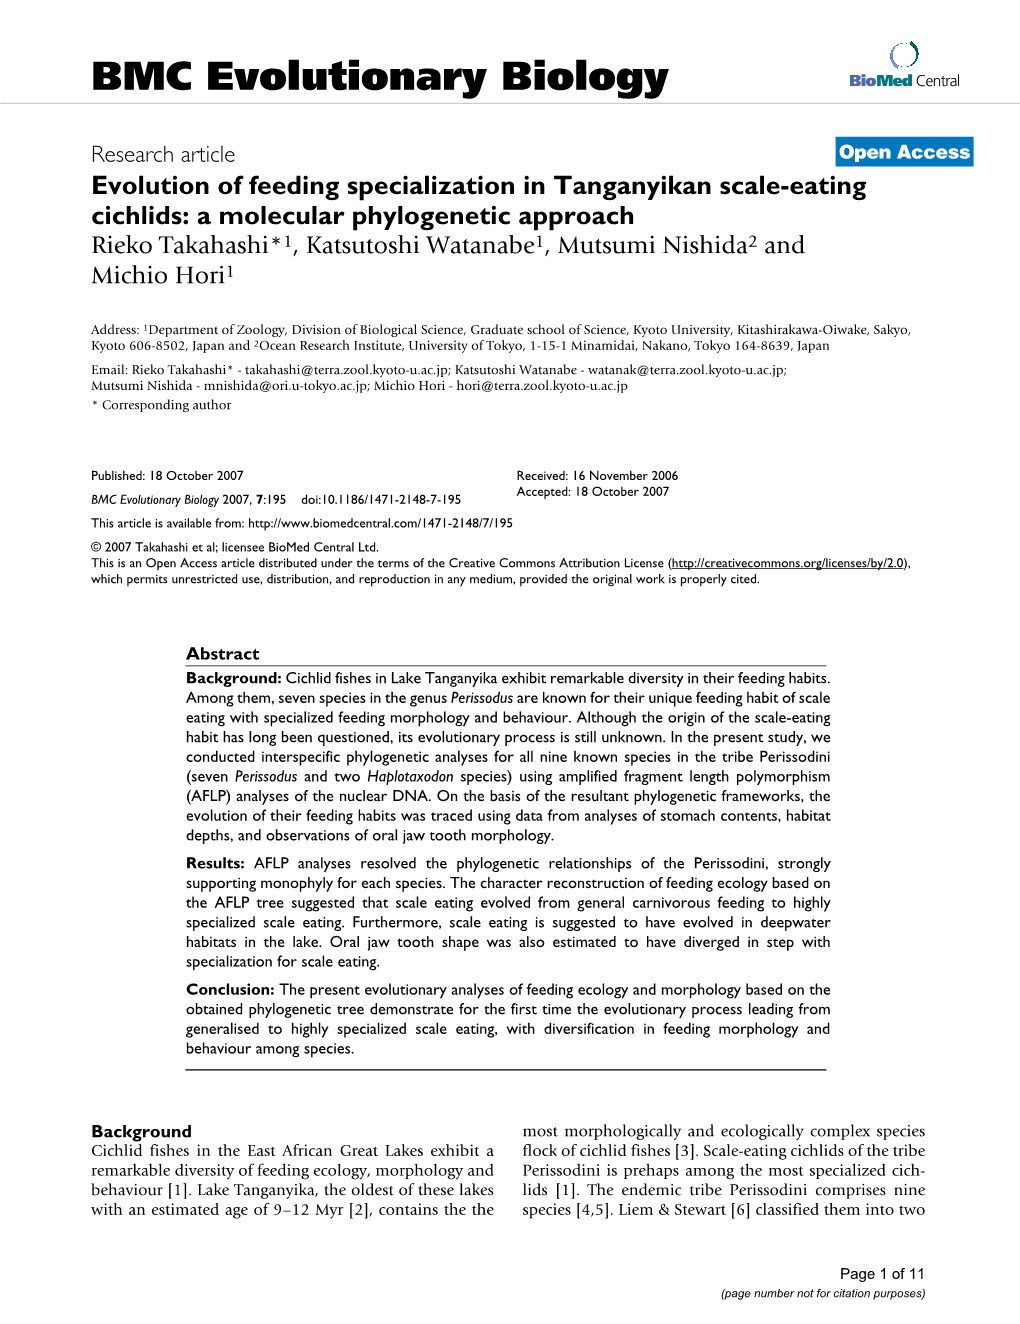 Evolution of Feeding Specialization in Tanganyikan Scale-Eating Cichlids